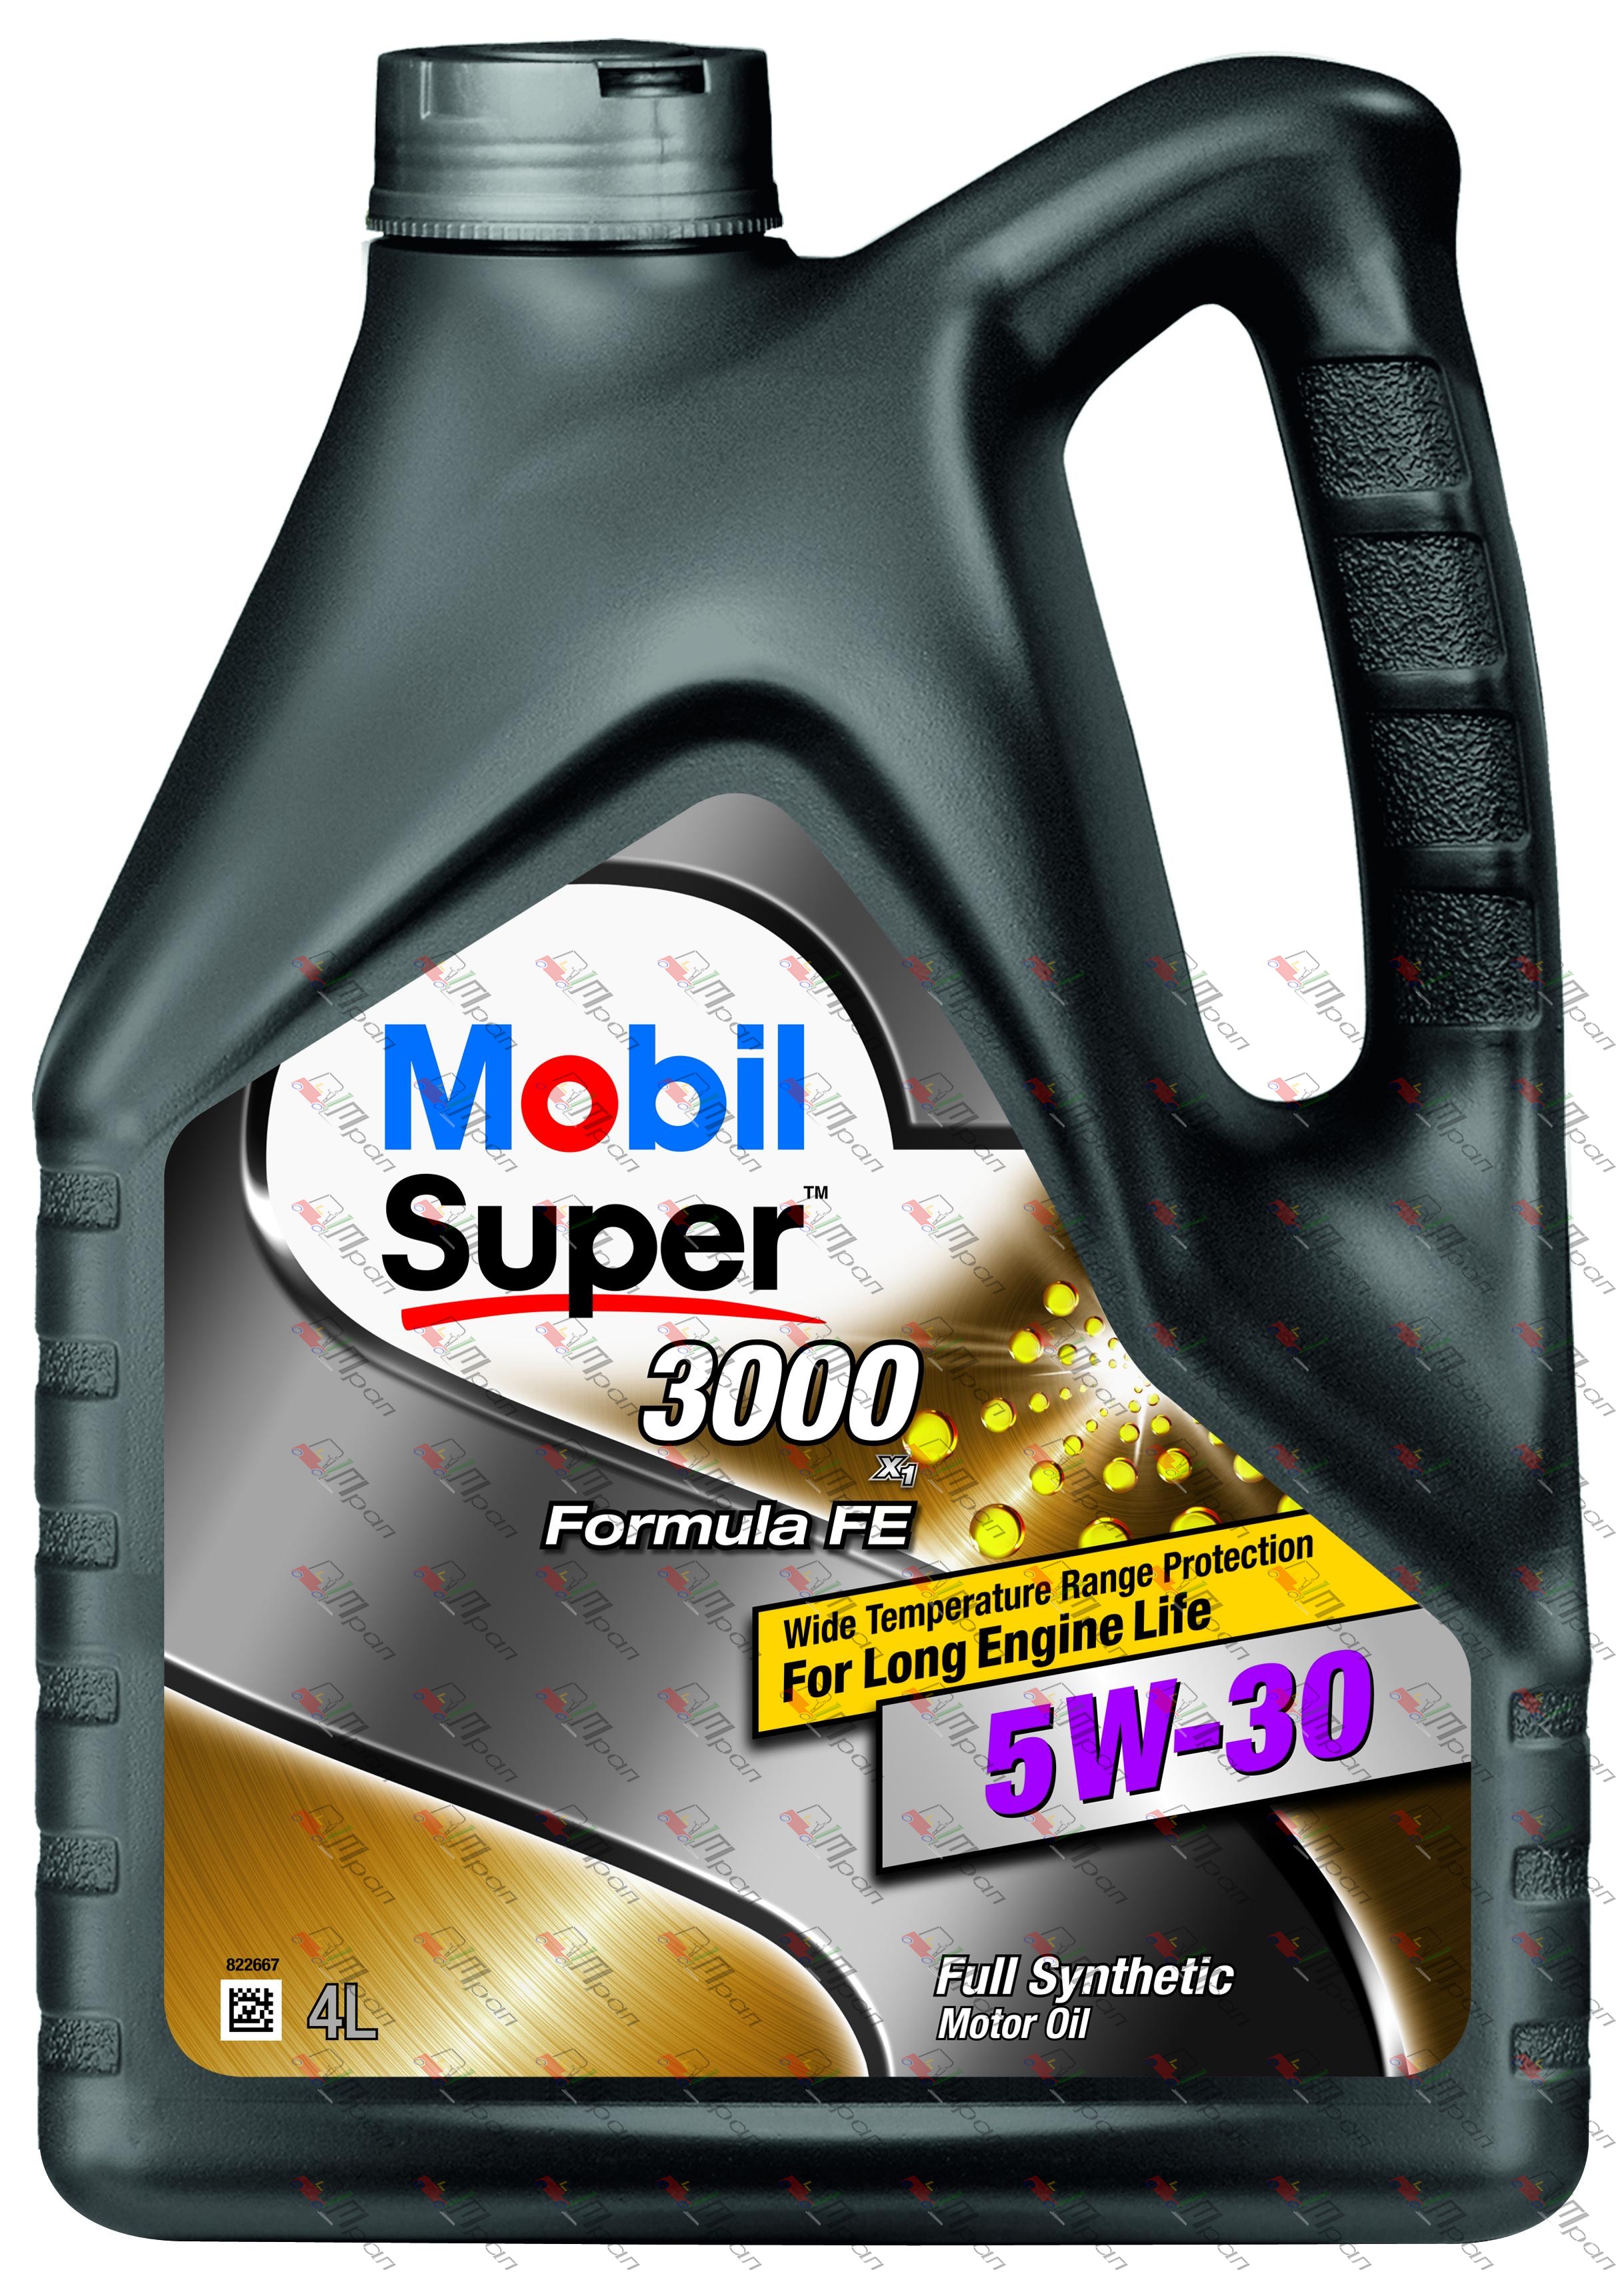 Mobil Масло моторное синтетич. Mobil Super 3000 FE 5w30 4л